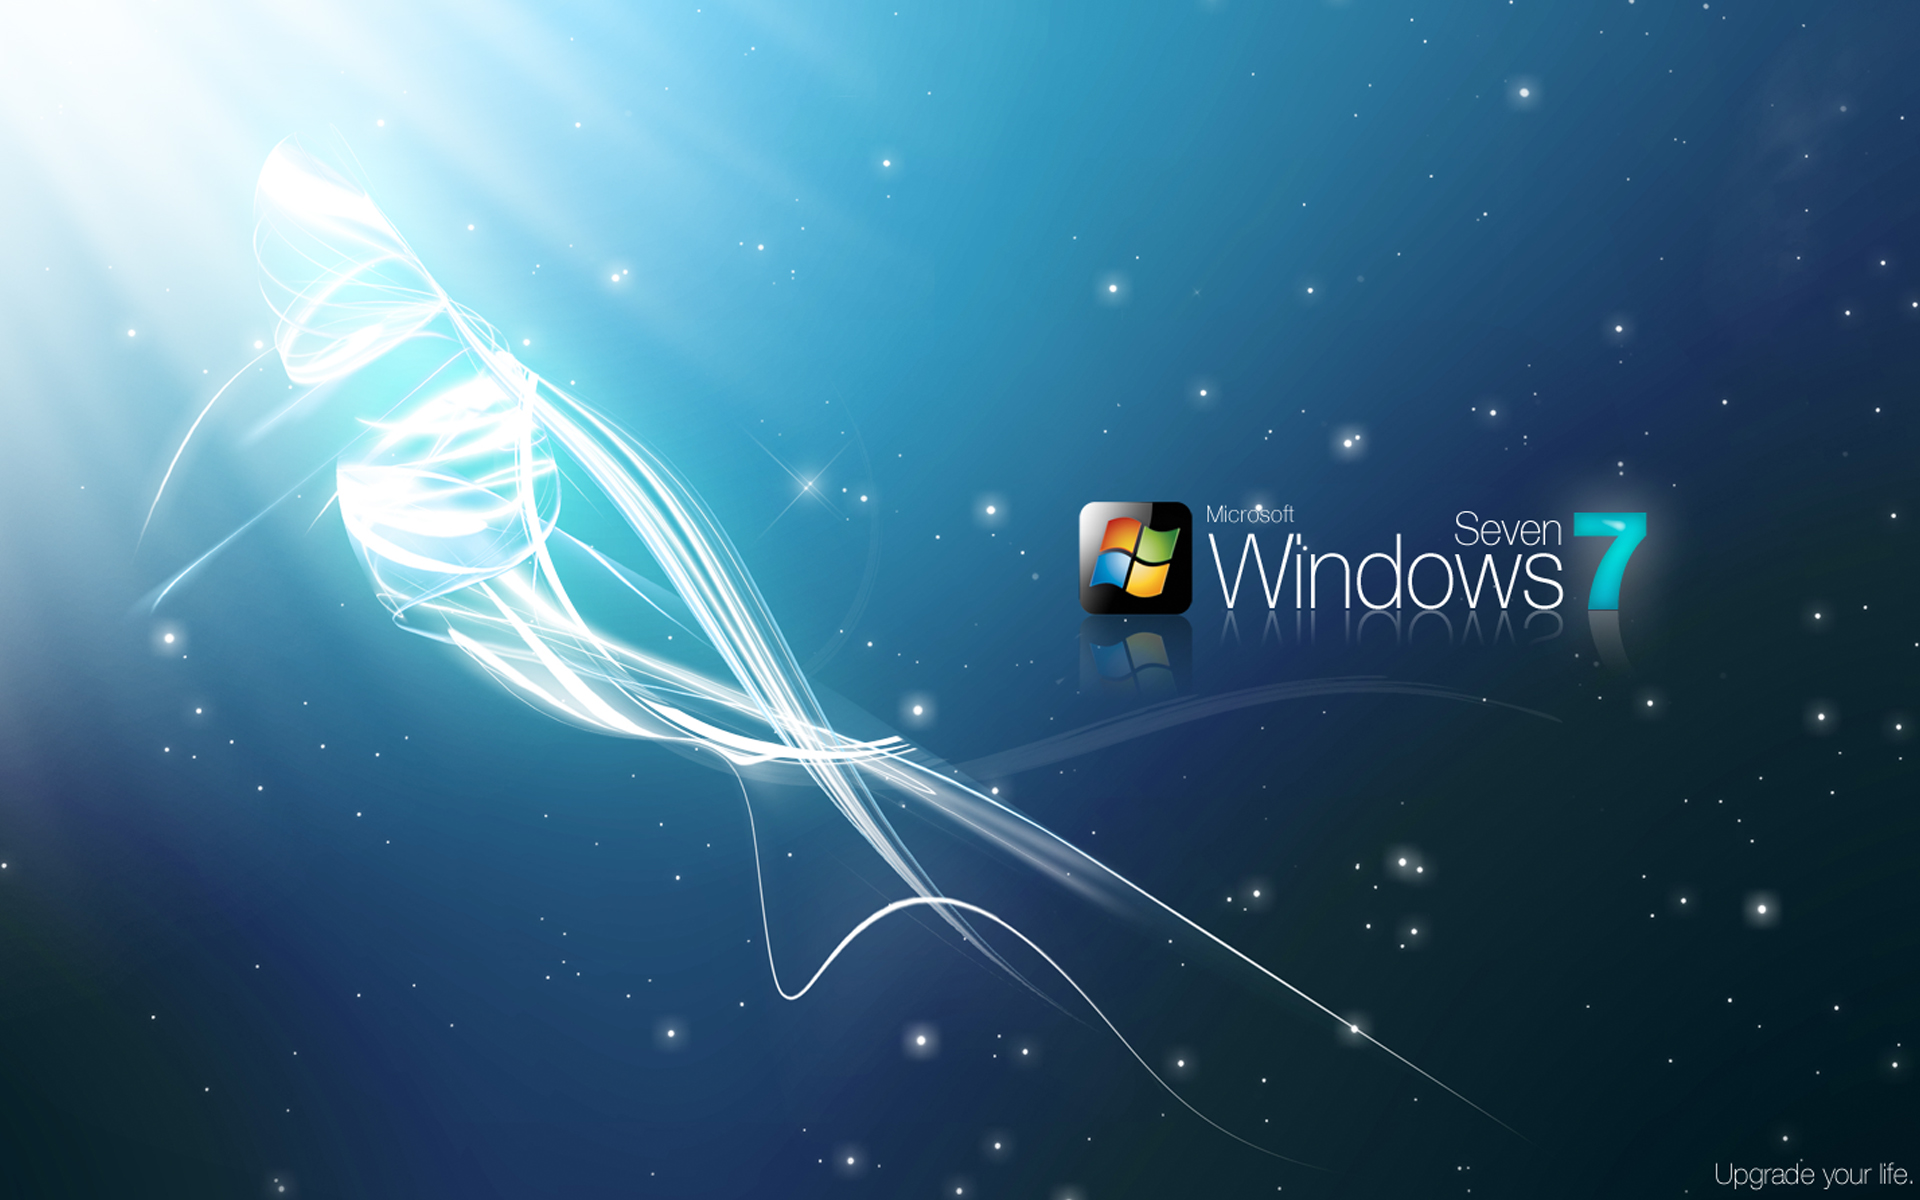 Free HQ Windows 7 Ultimate 1 Wallpaper   Free HQ Wallpapers